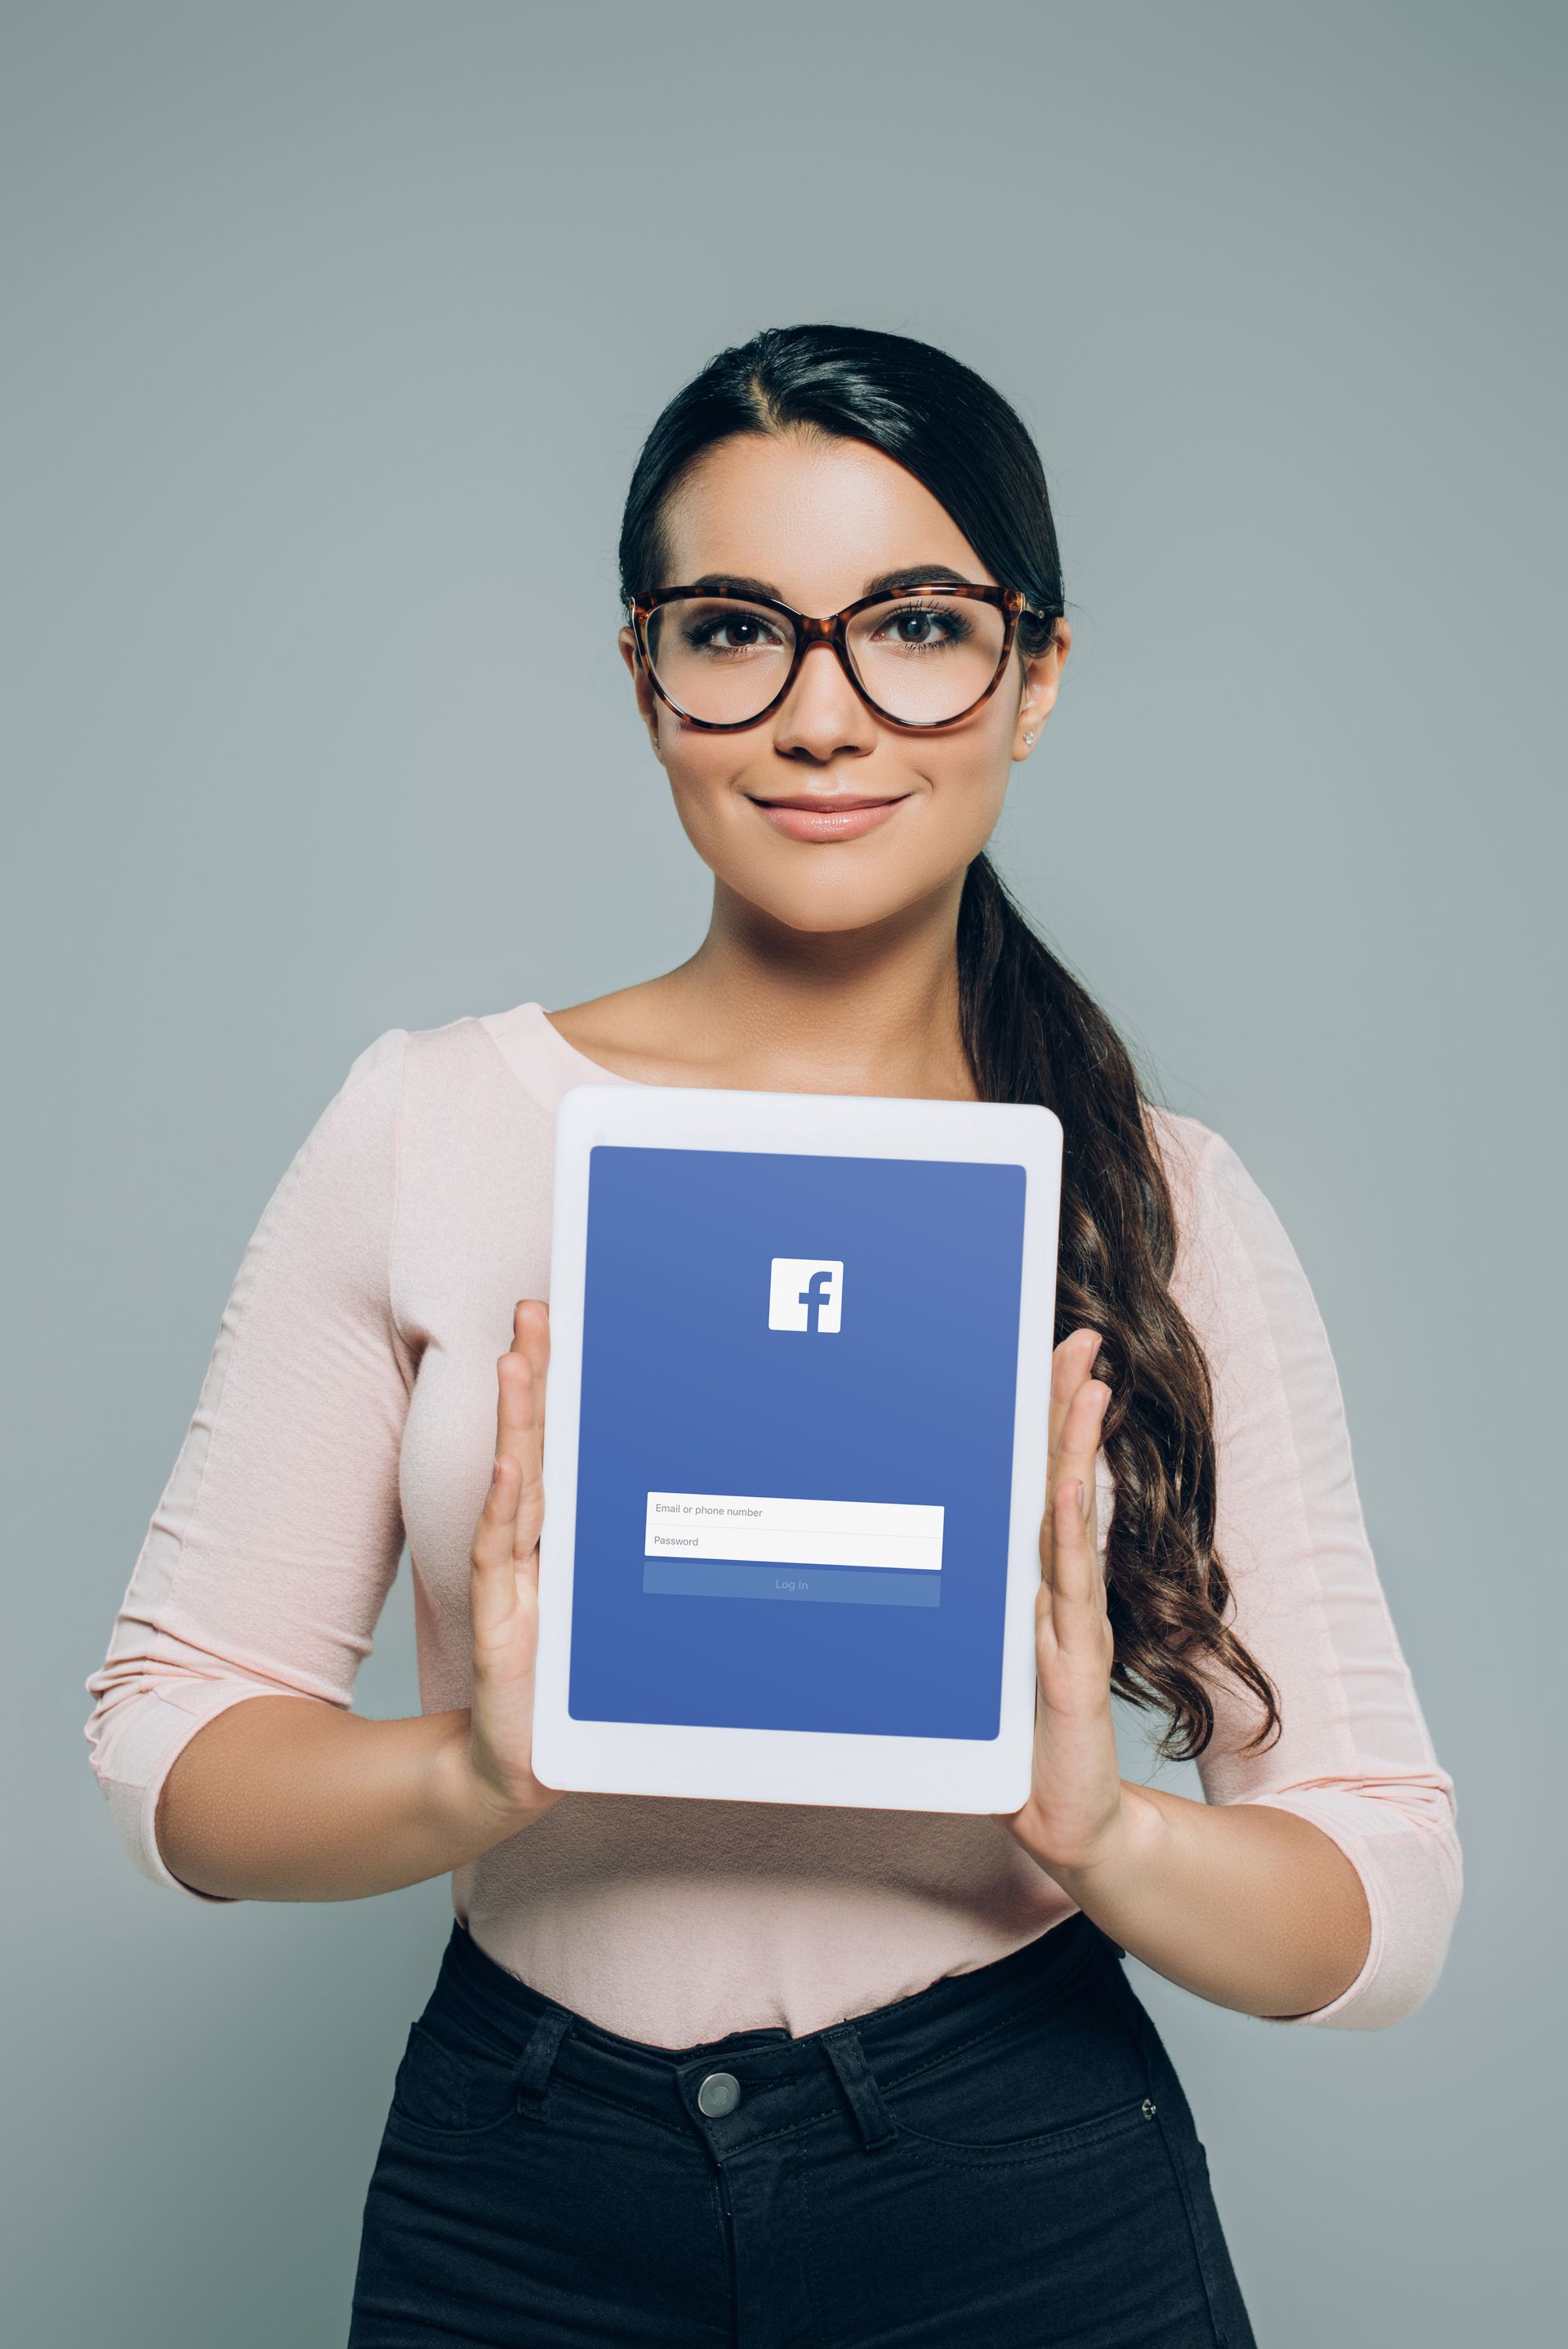 Woman in eyeglasses showing a tablet with the facebook icon on it